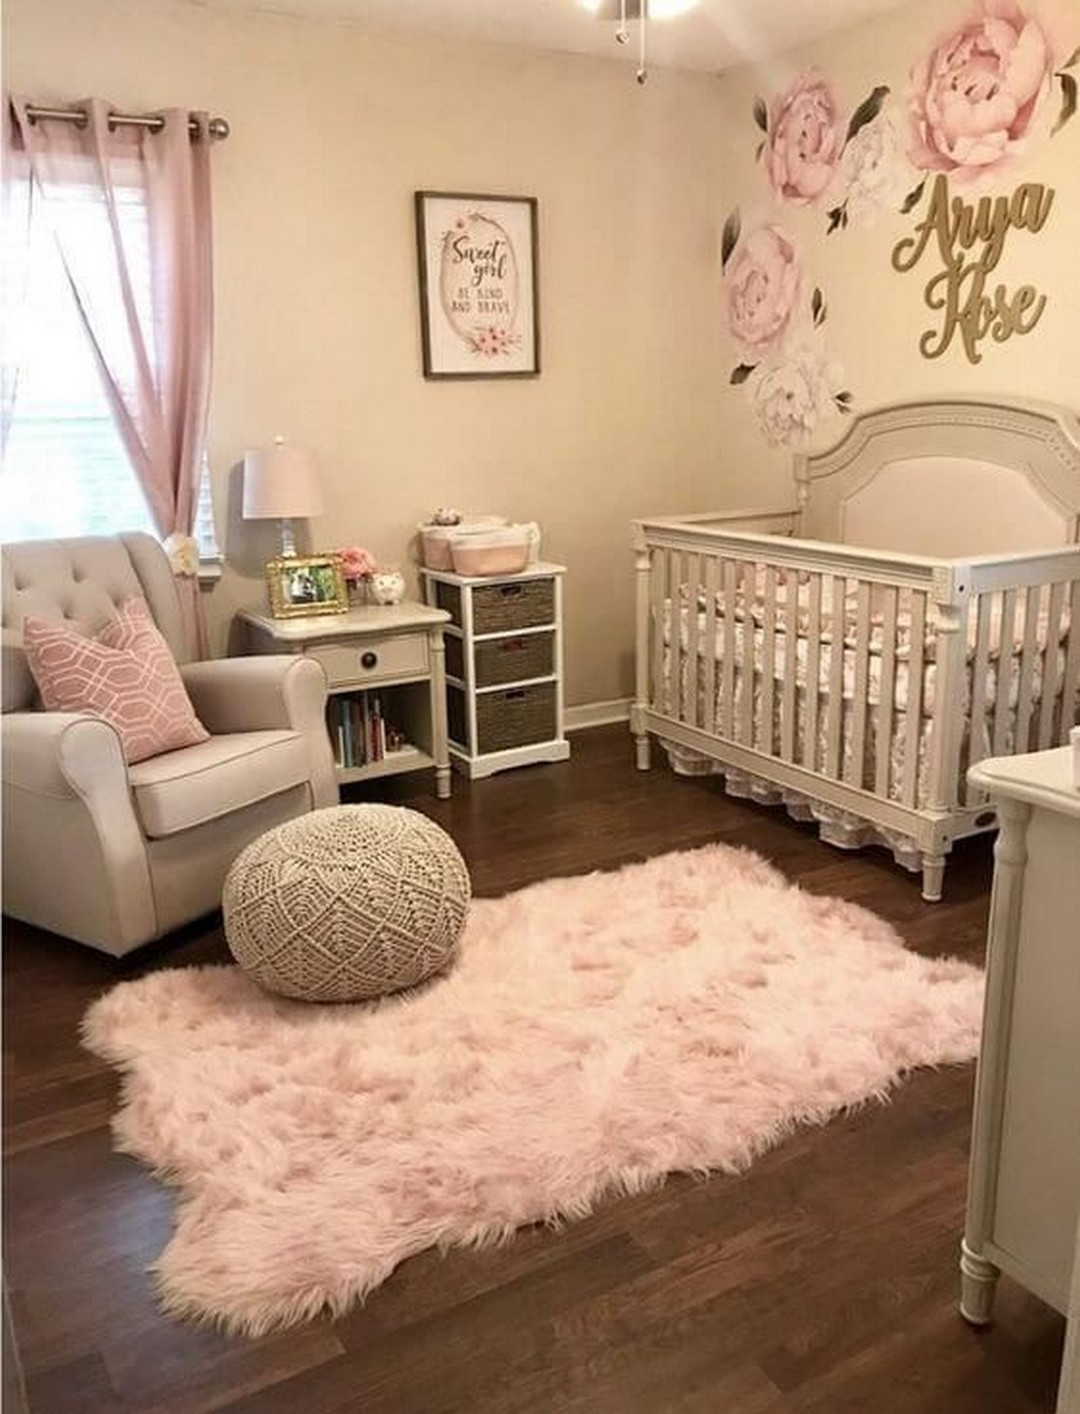 Newborn Baby Girl Room Decorations
 17 Cute Nursery Ideas For Your Baby Girl House & Living